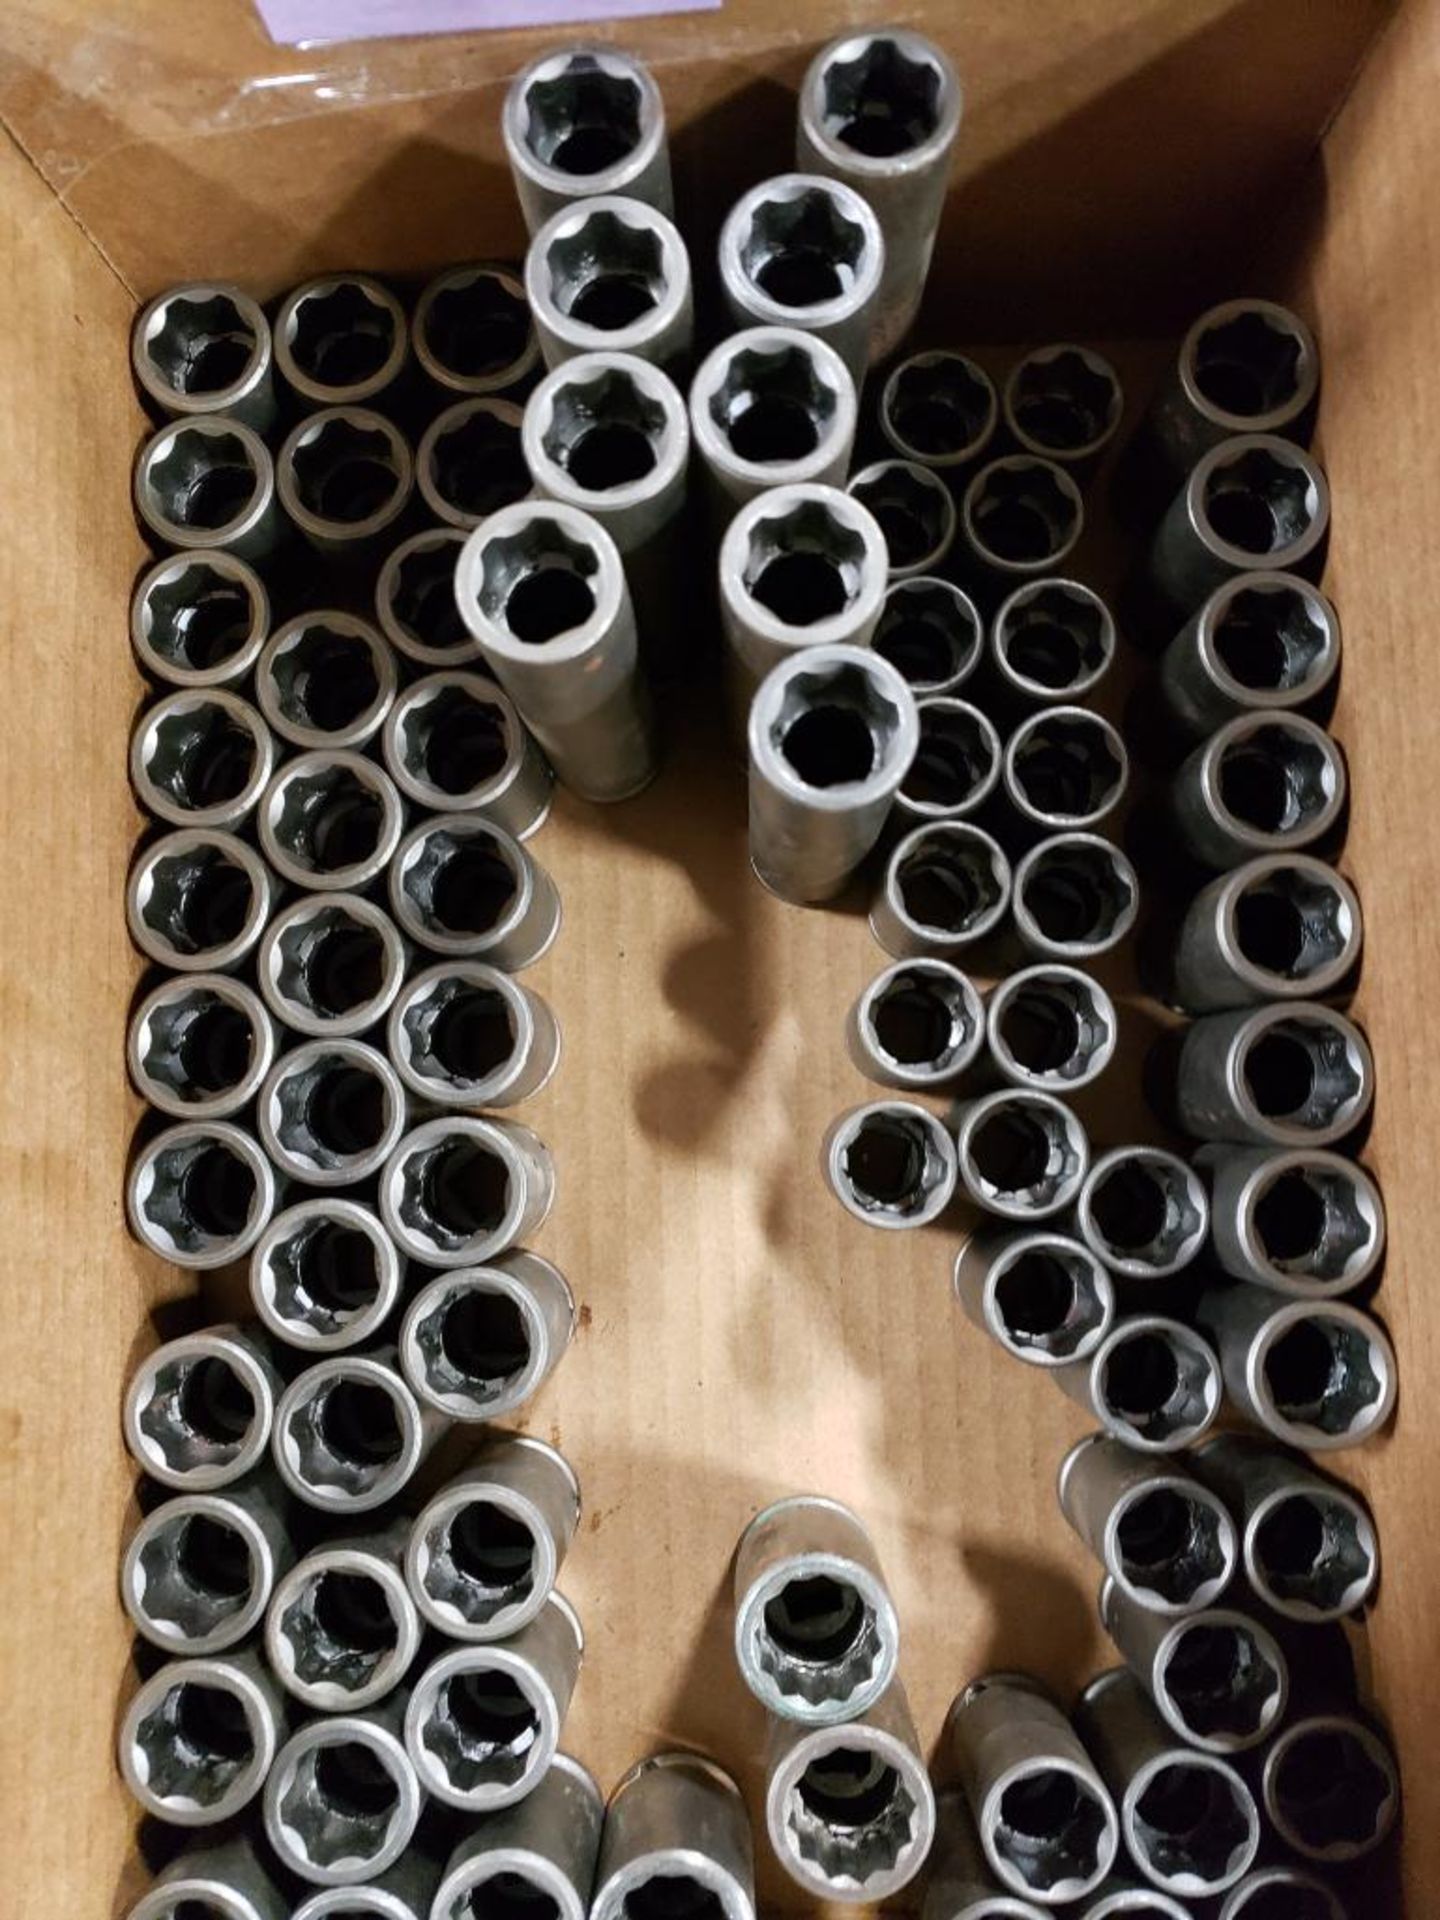 Large Qty of assorted APEX impact socket. 15mm, 16mm, 17mm. 3/8" drive. - Image 2 of 3